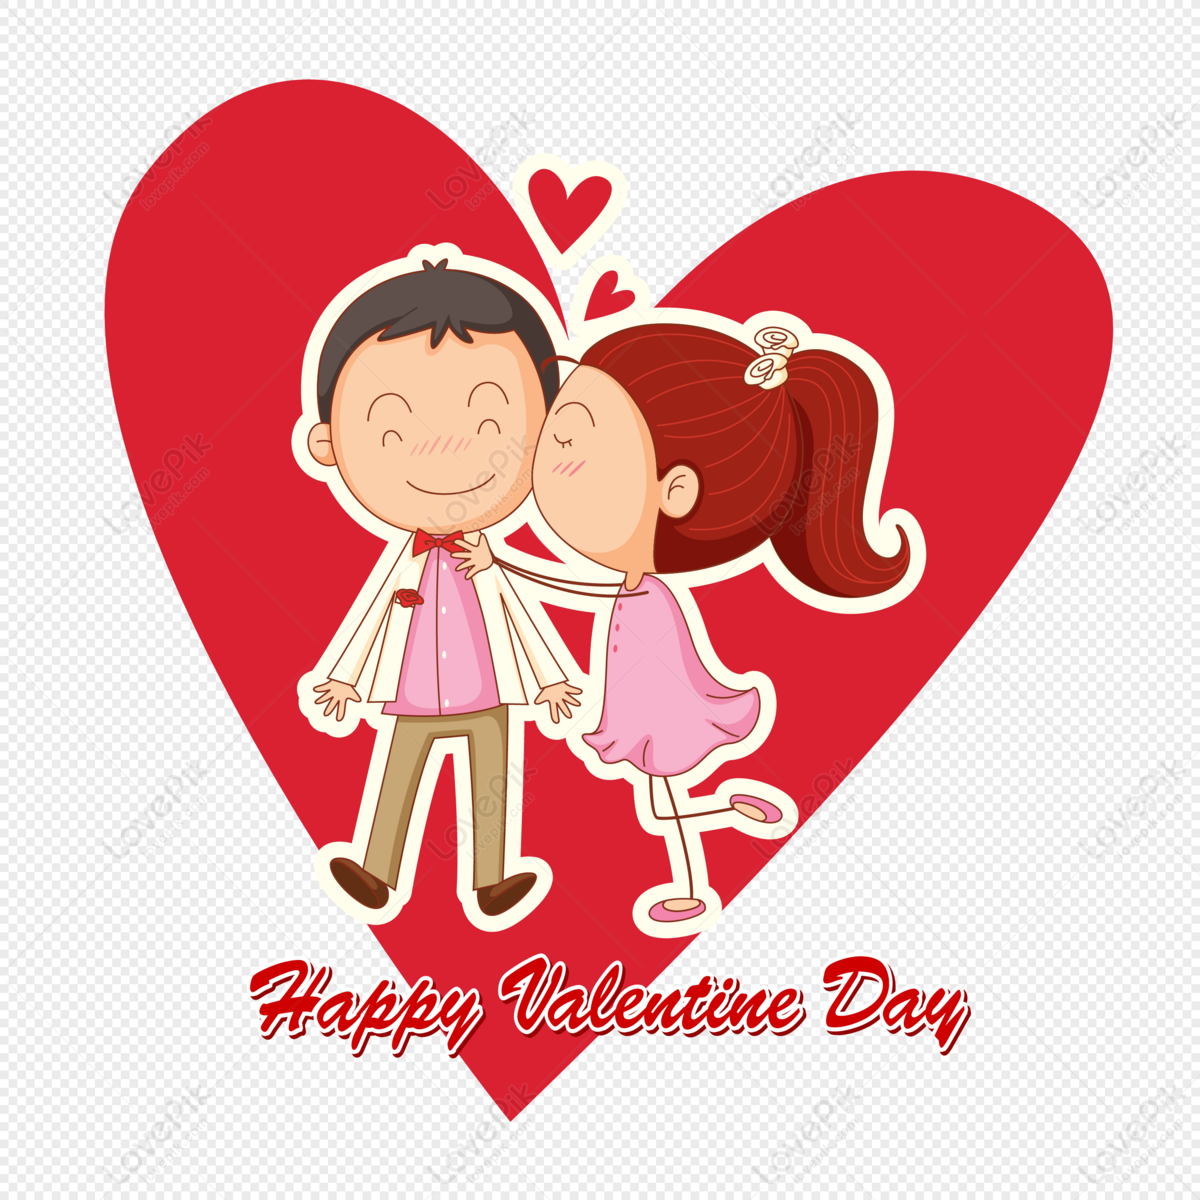 Valentines Day Lover PNG Free Download And Clipart Image For Free Download  - Lovepik | 400942343